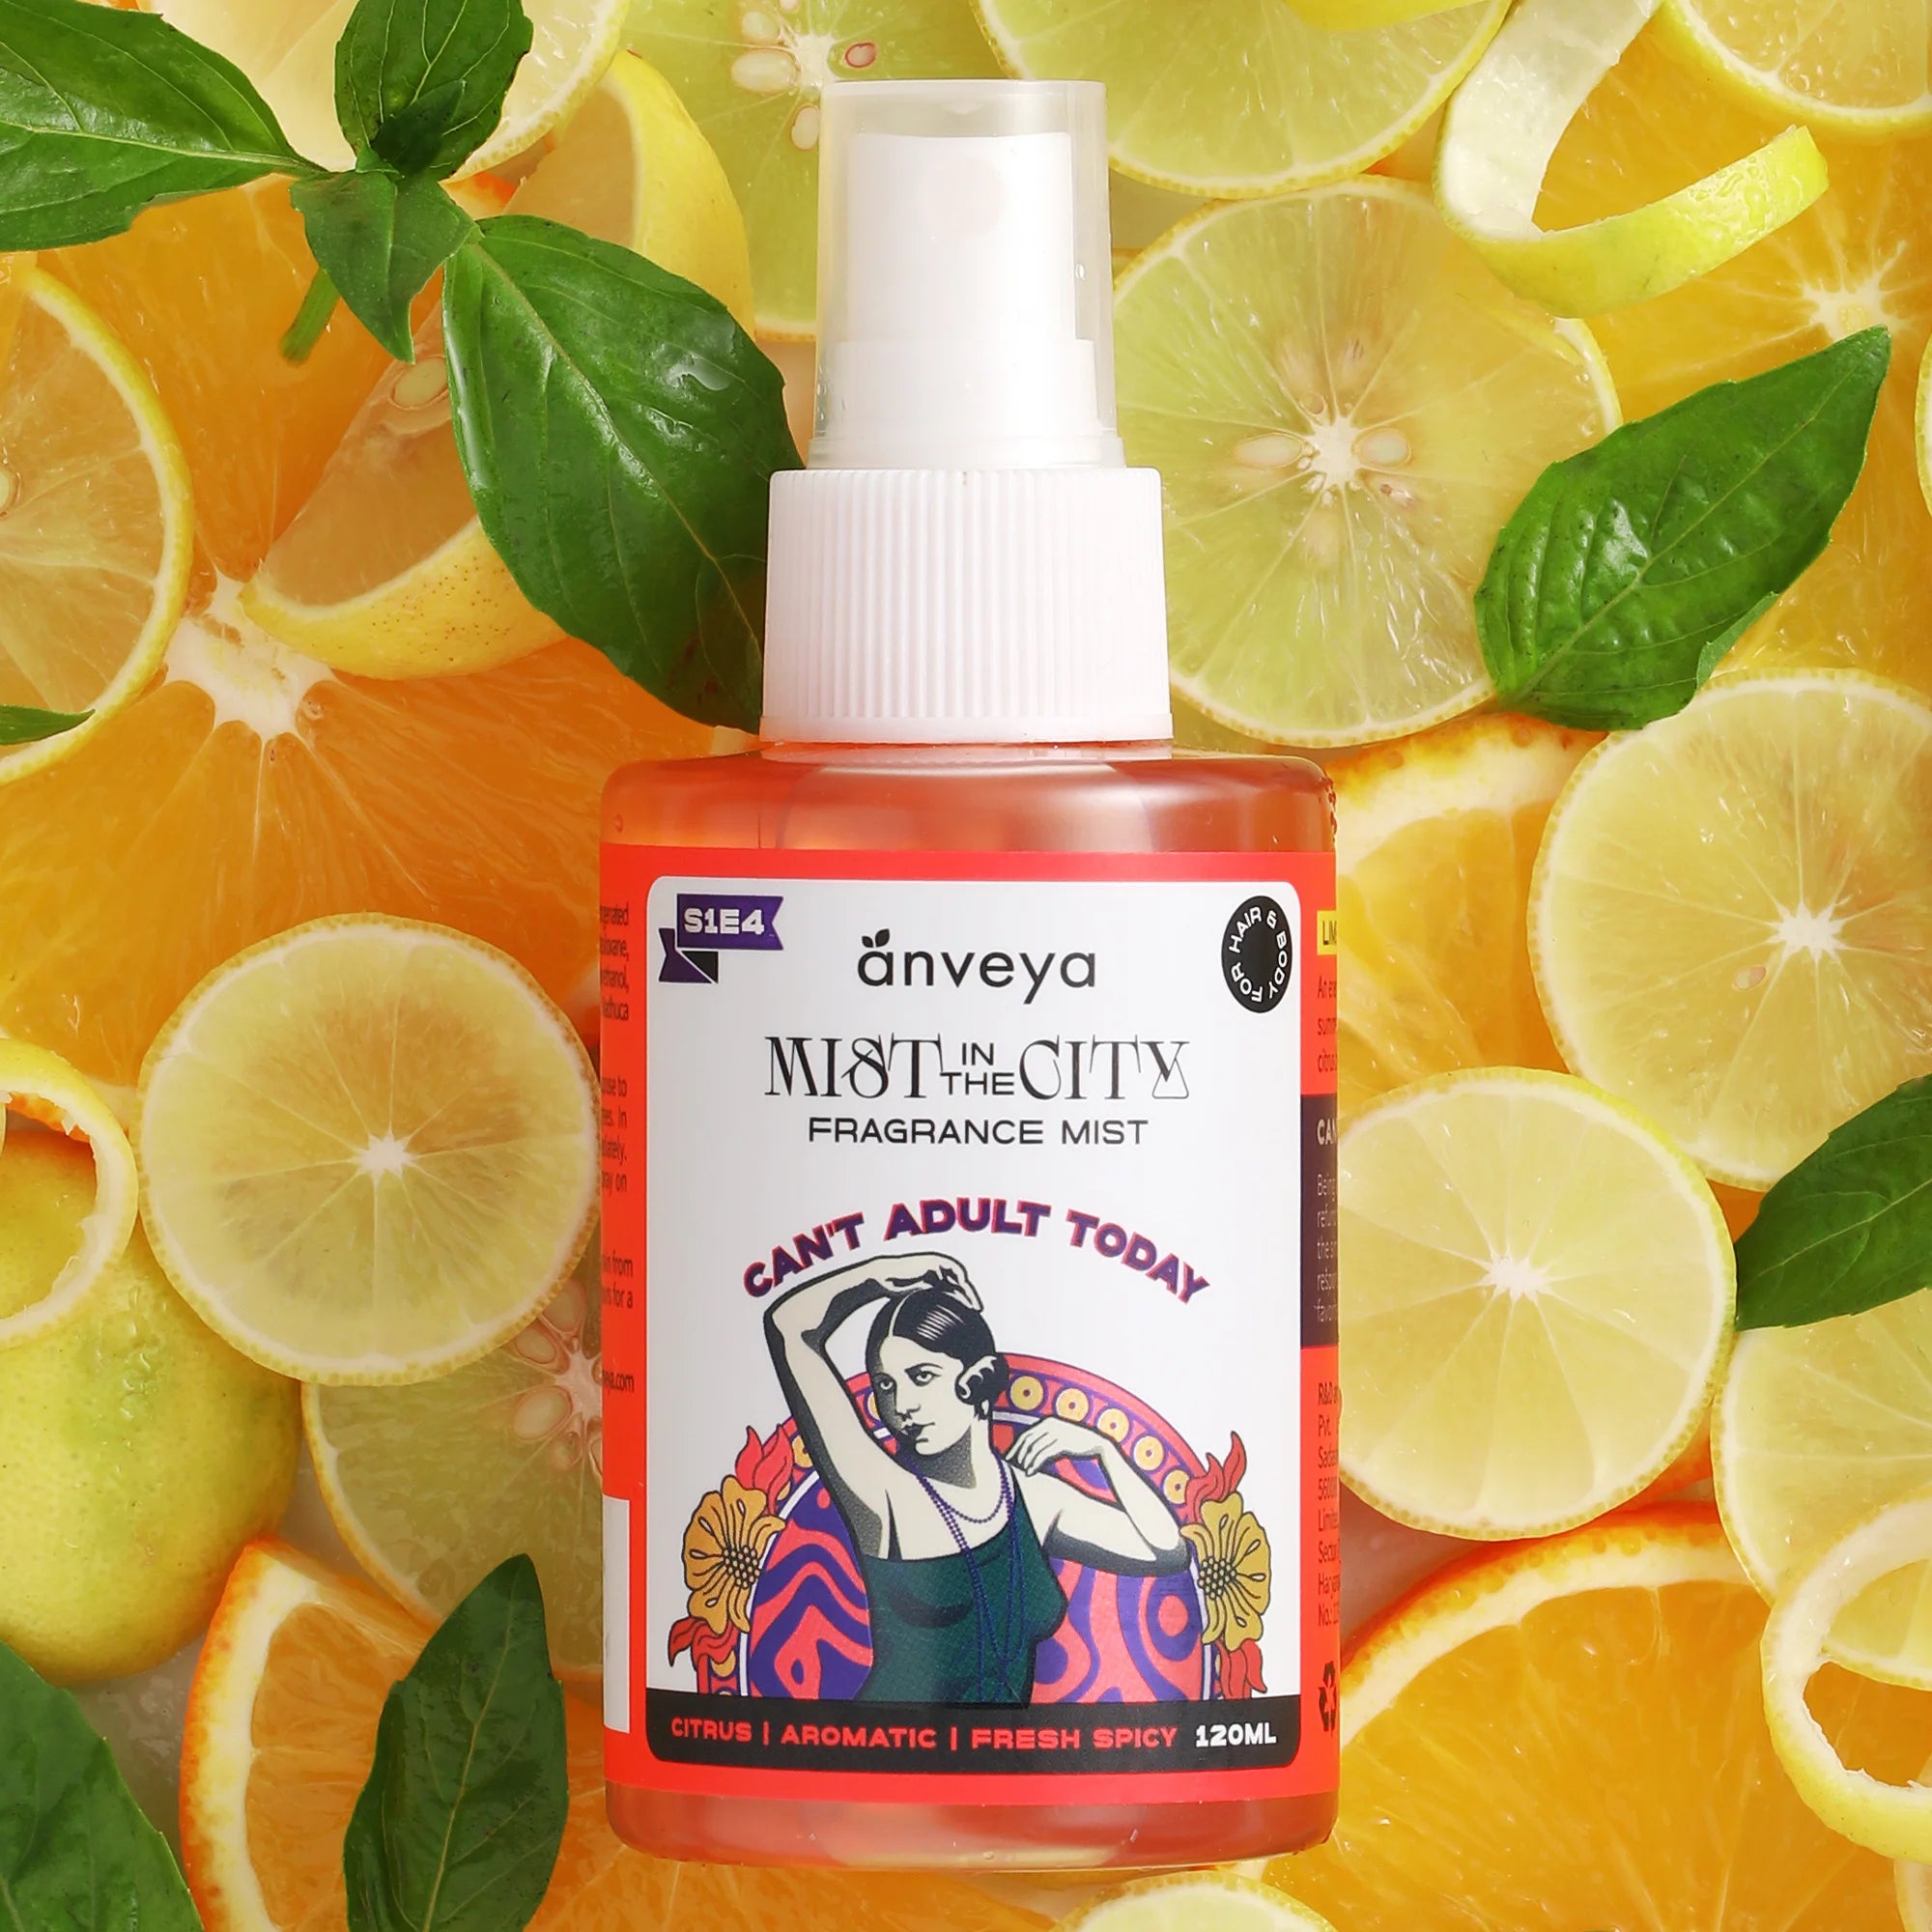 Anveya Body and Hair Fragrance Mist in the City